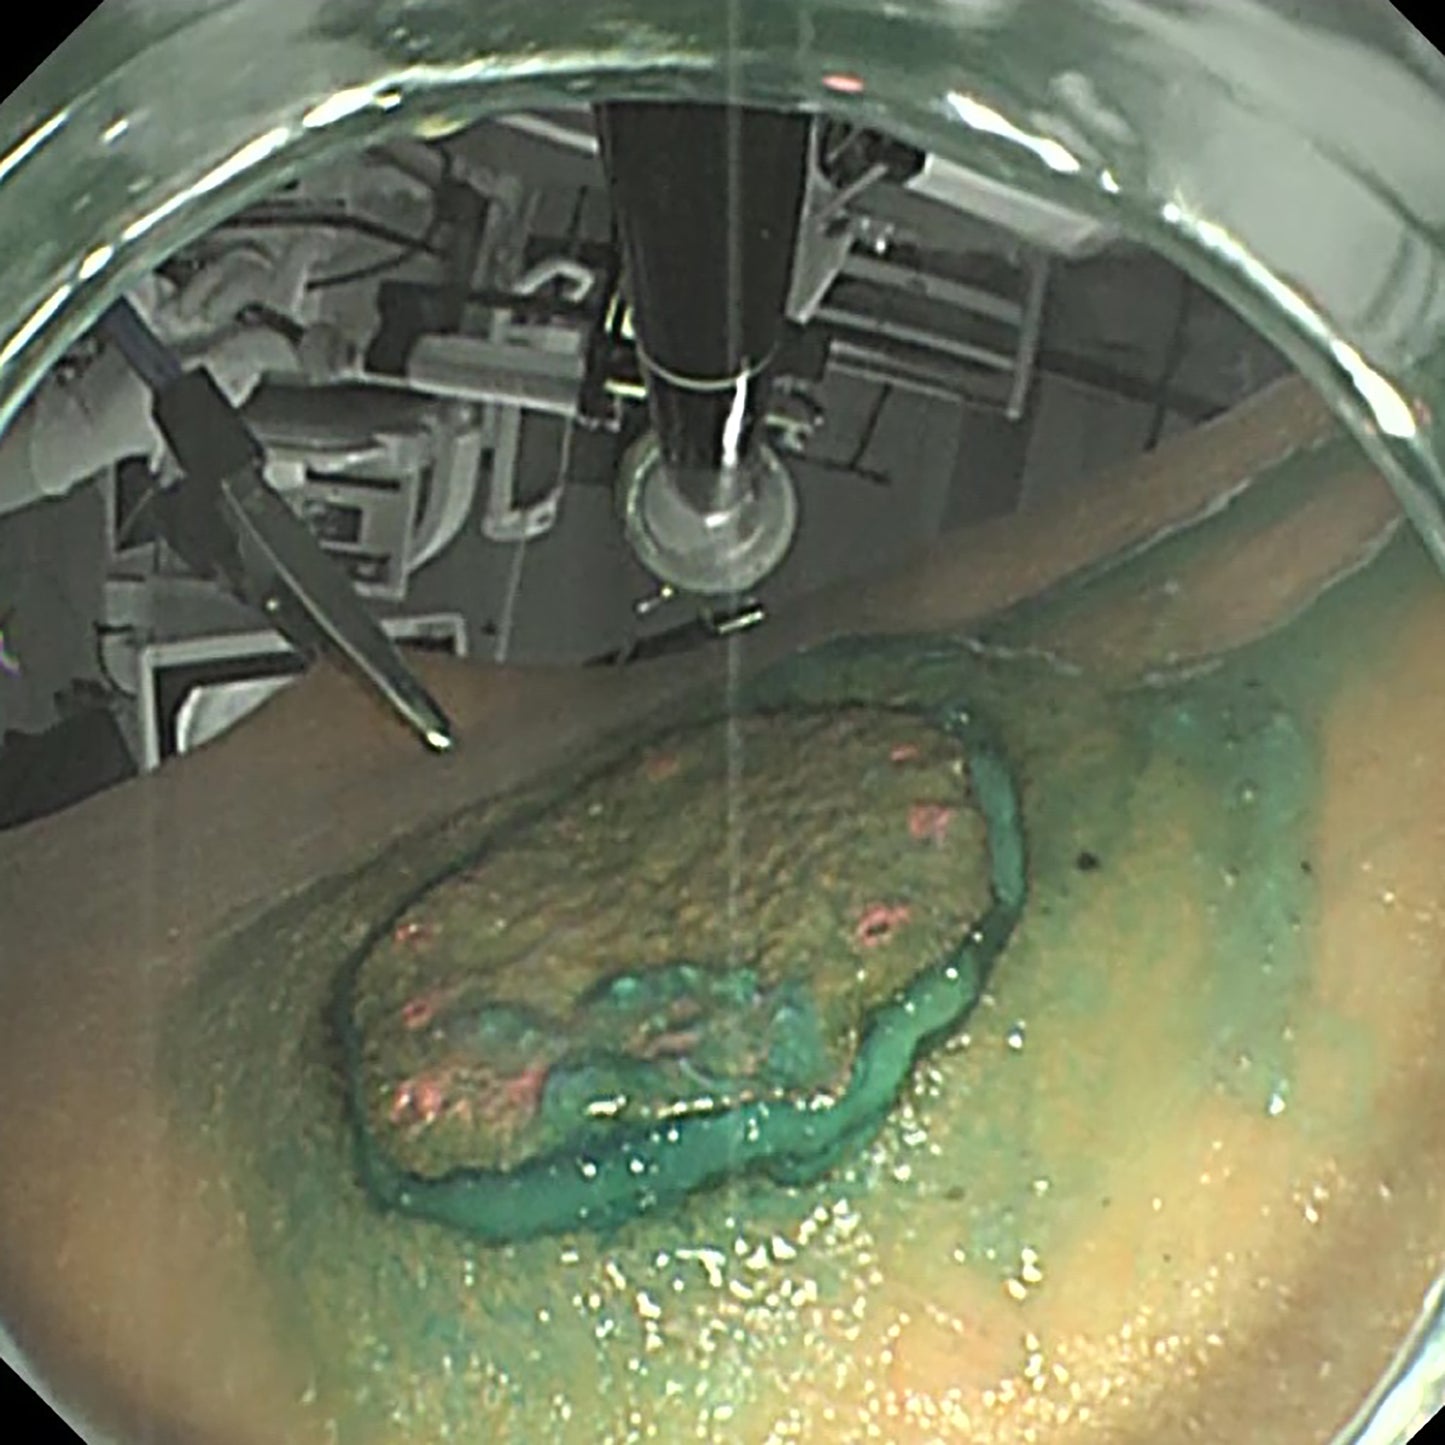 Endoscopic viewpoint of the circular incision made on the simulated gastric mucosal lining. 